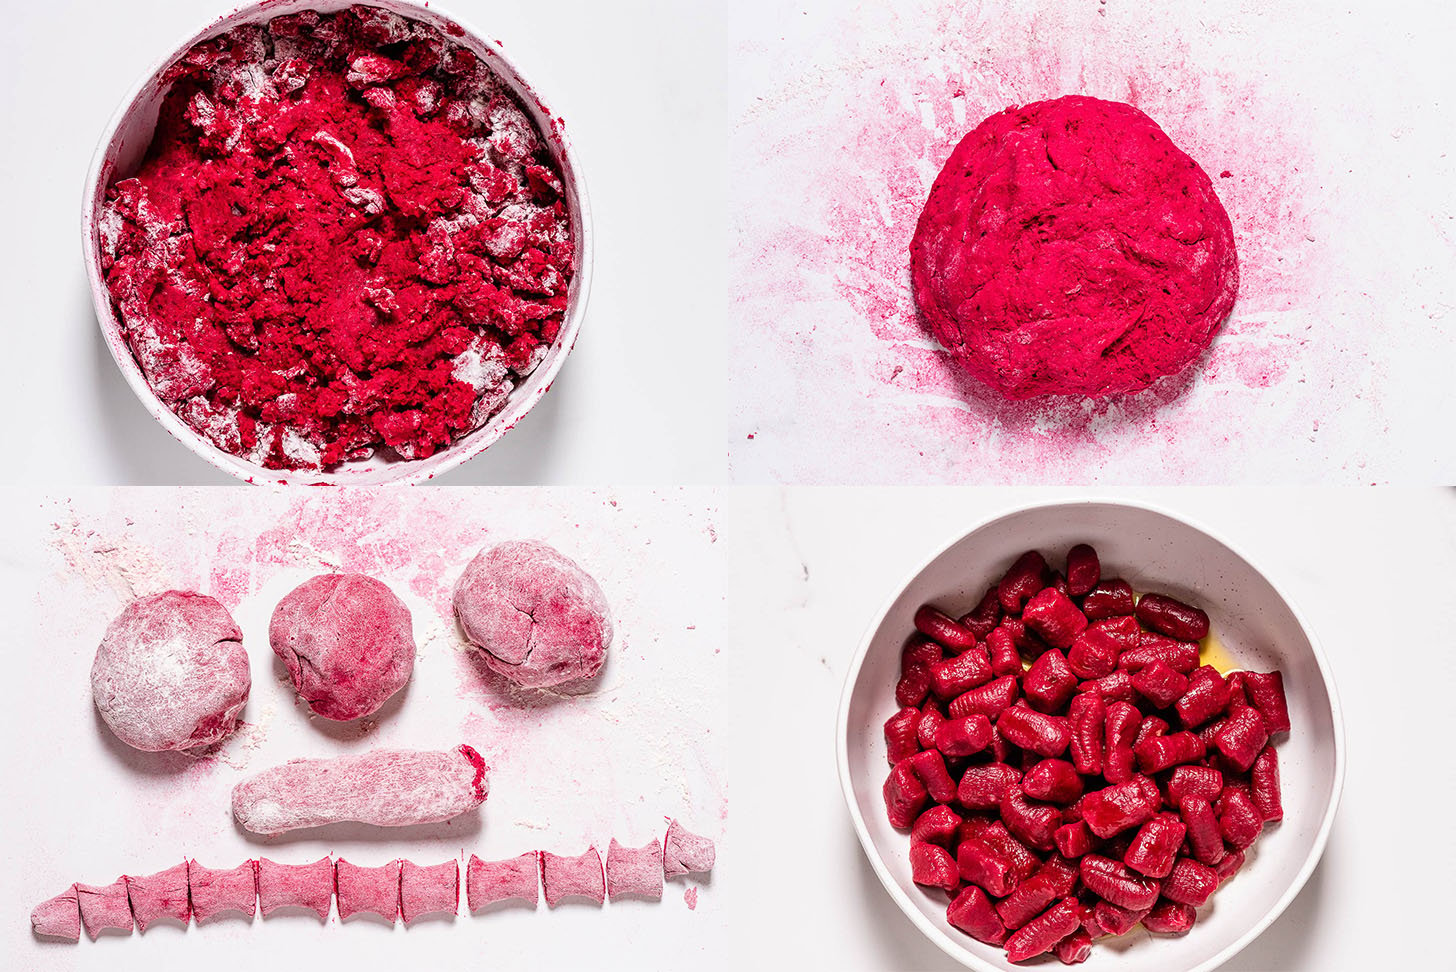 4 pictures showing how to make this beet gnocchi recipe steps 5-8